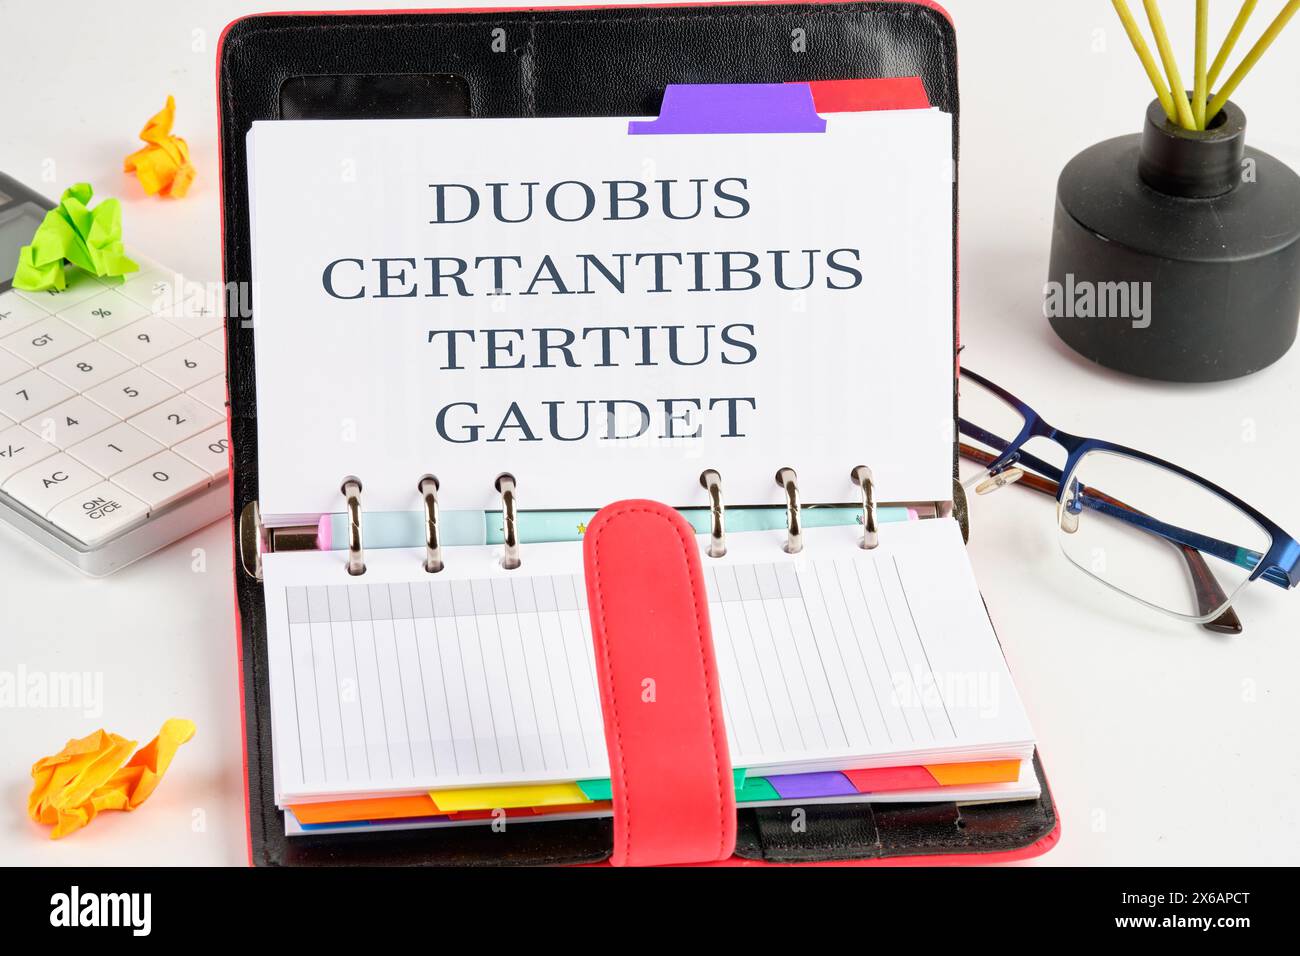 DUOBUS CERTANTIBUS TERTIUS GAUDET it means in Latin While two argue, the third rejoices. on a blank page of the business notebook Stock Photo